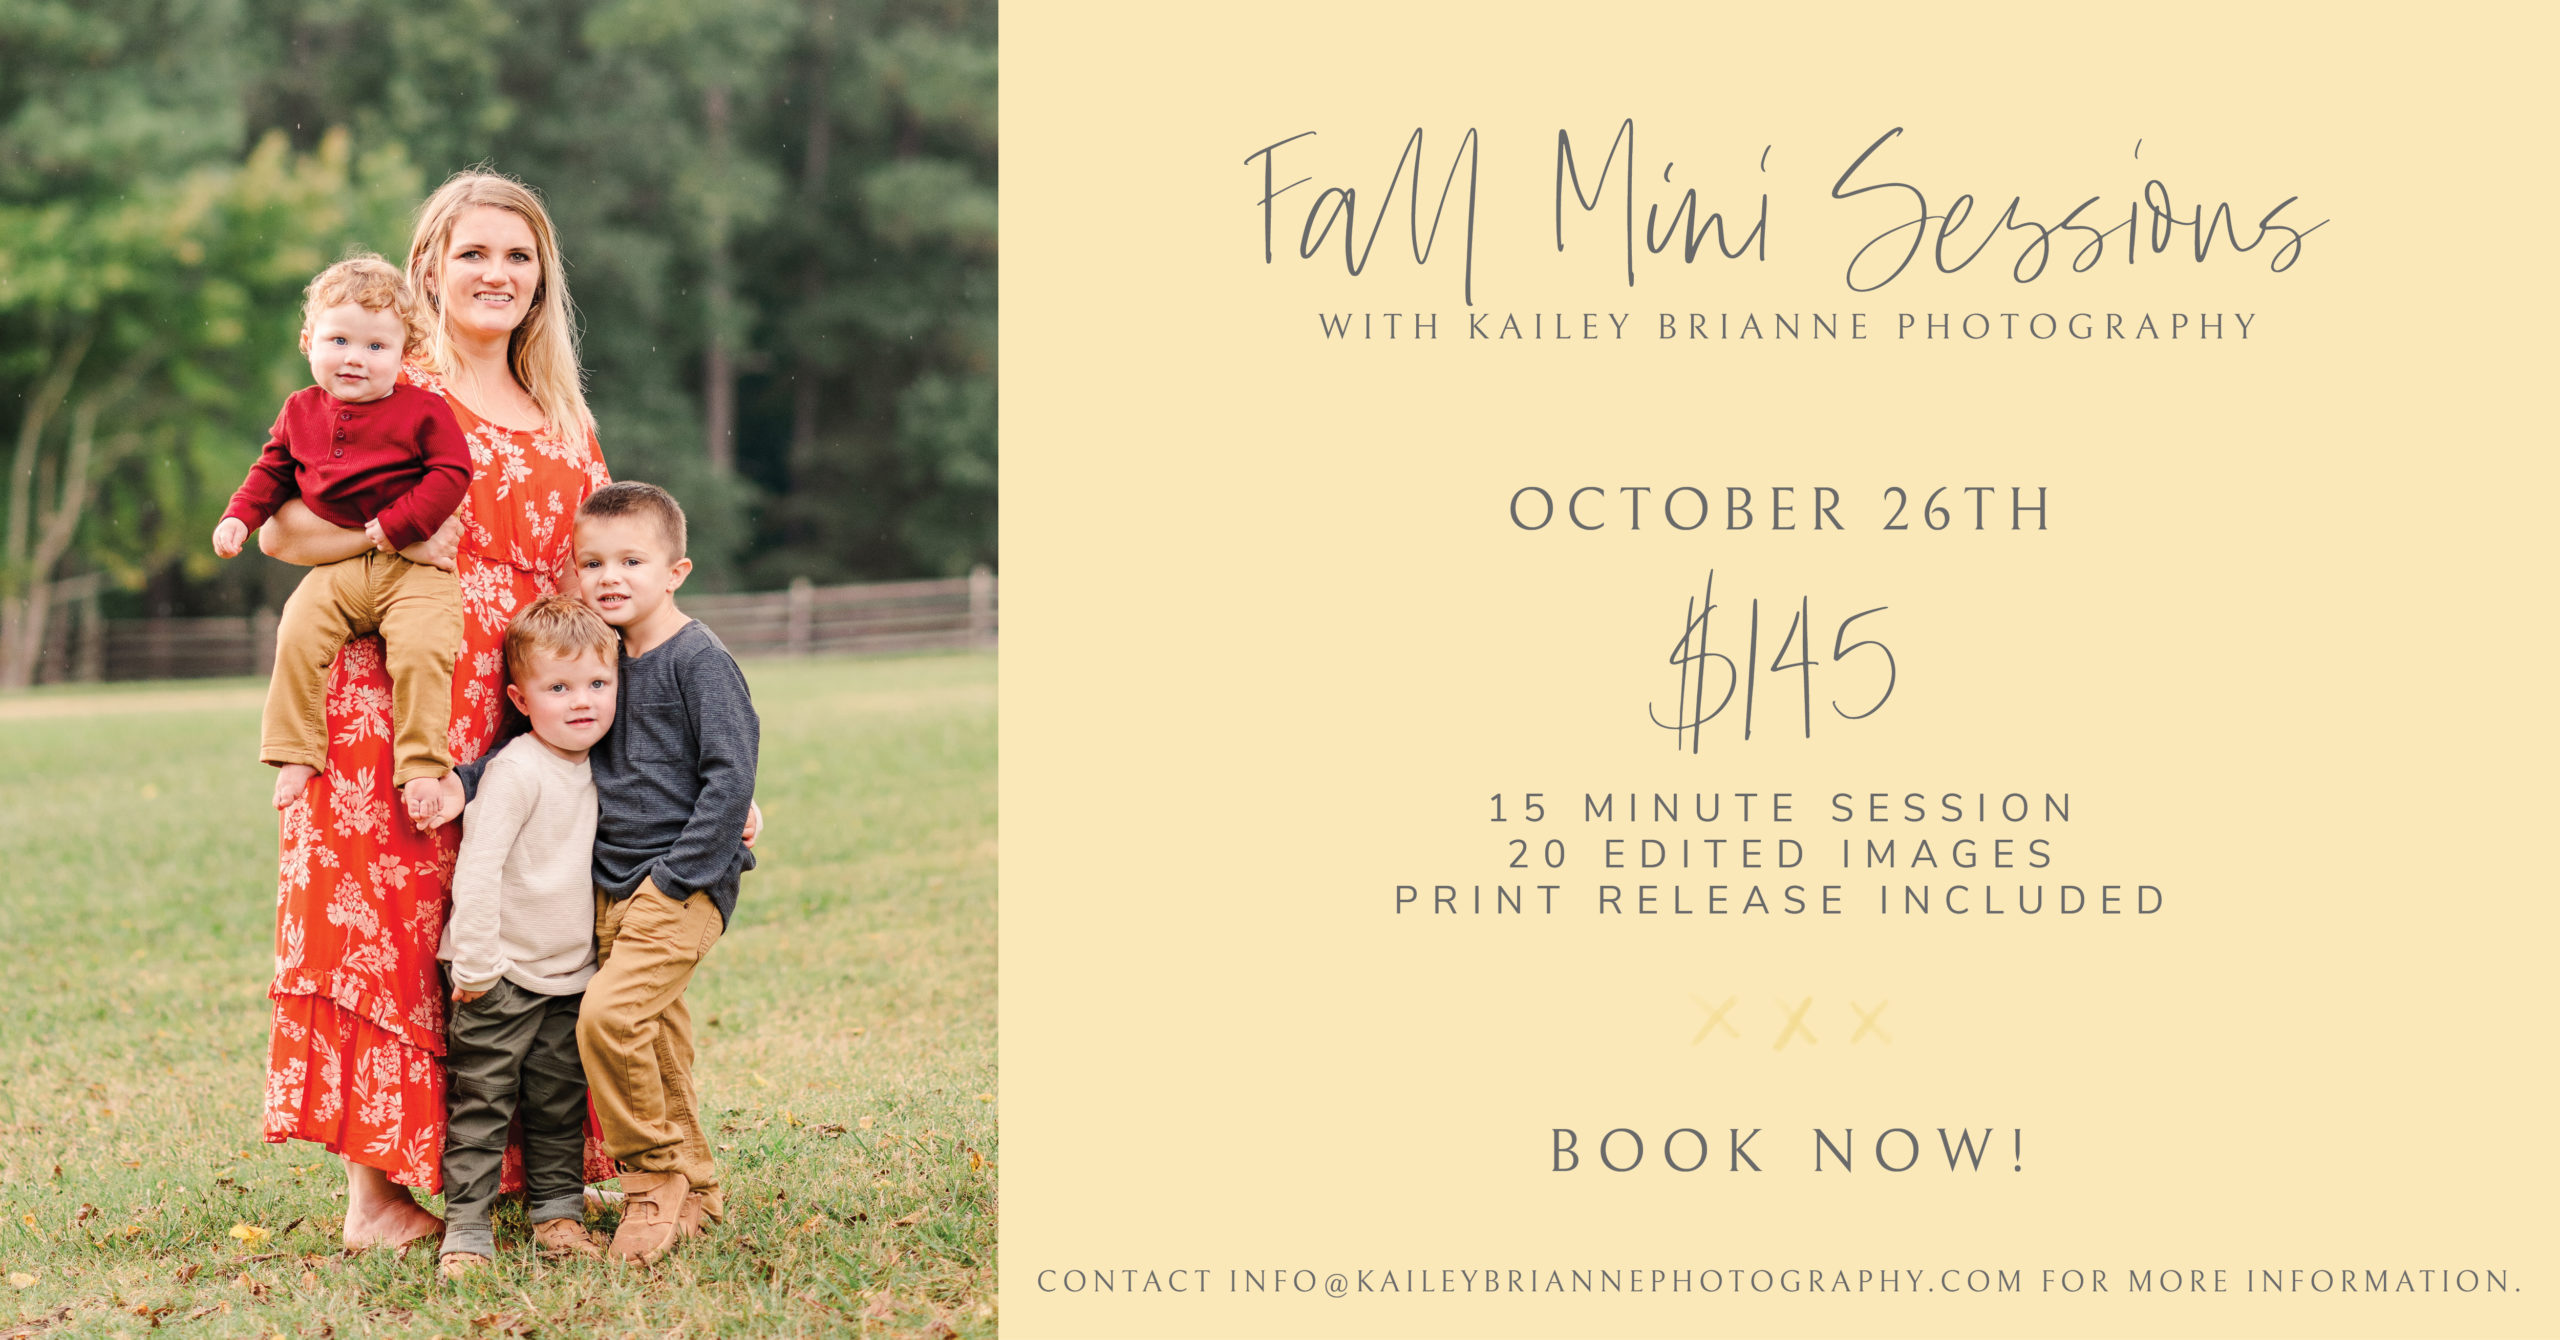 2021 Richmond Fall Family Mini Sessions at Crump Meadow Farm Park with Richmond Family Photographer Kailey Brianne Photography. 